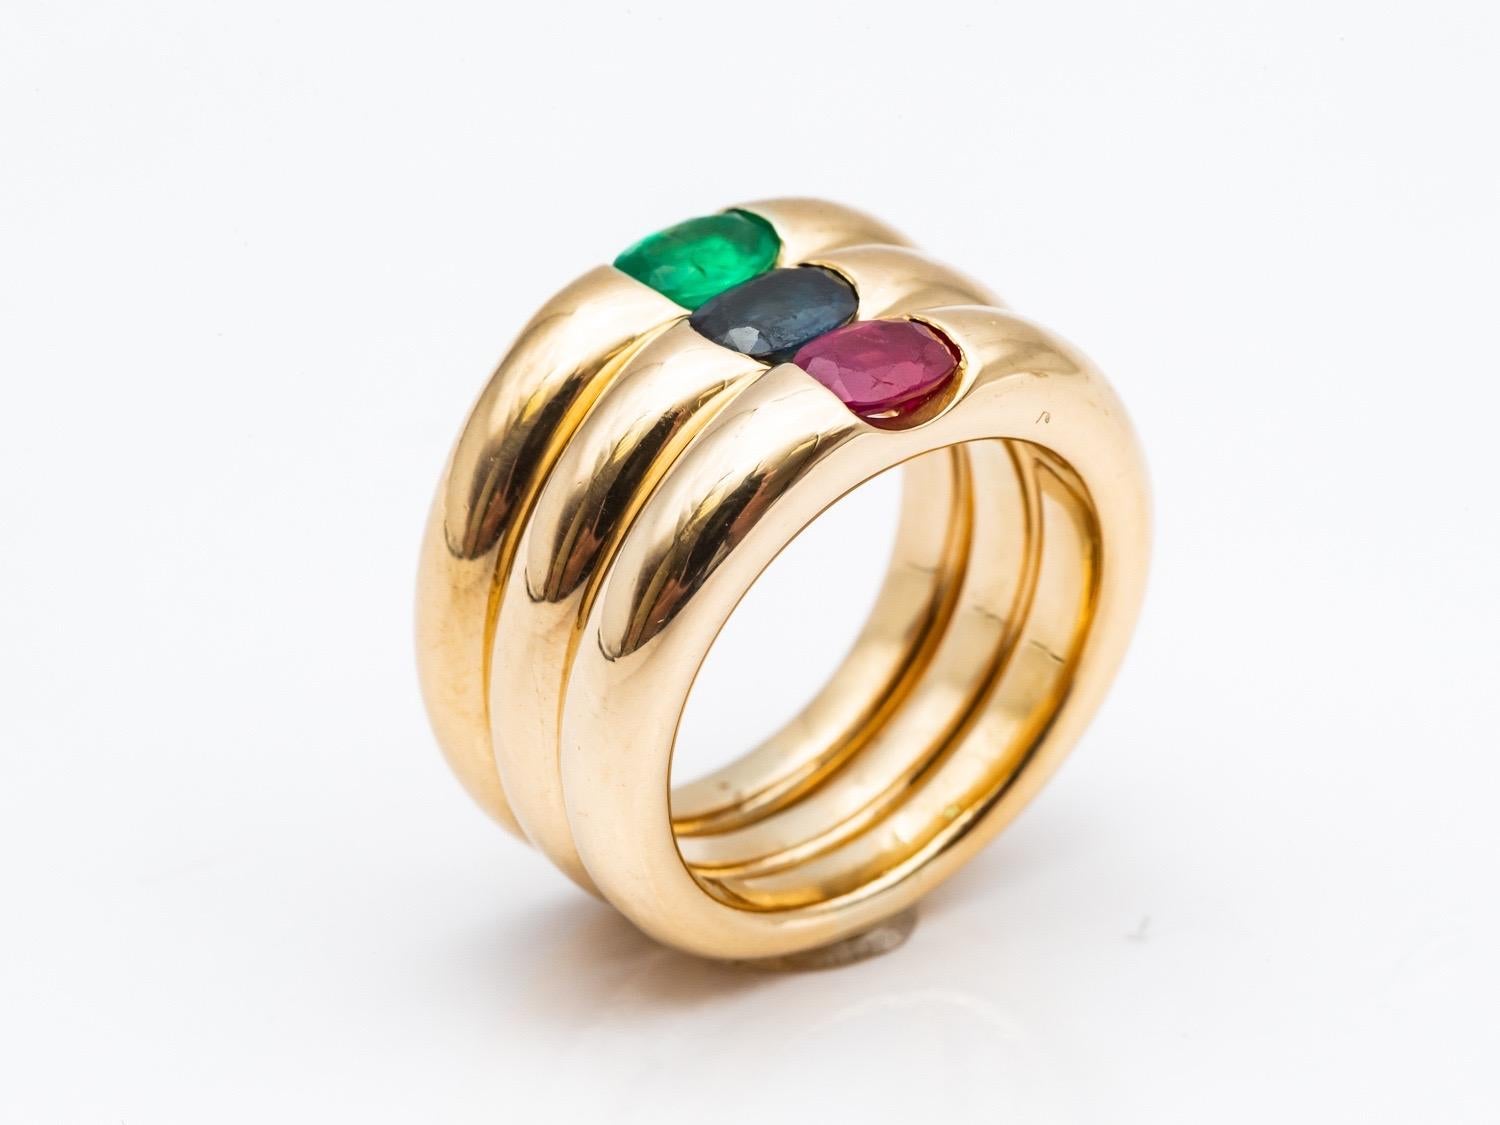 Three 18 Karat Gold Bangles Rings Set with an Emerald, a Sapphire, and a Ruby 1